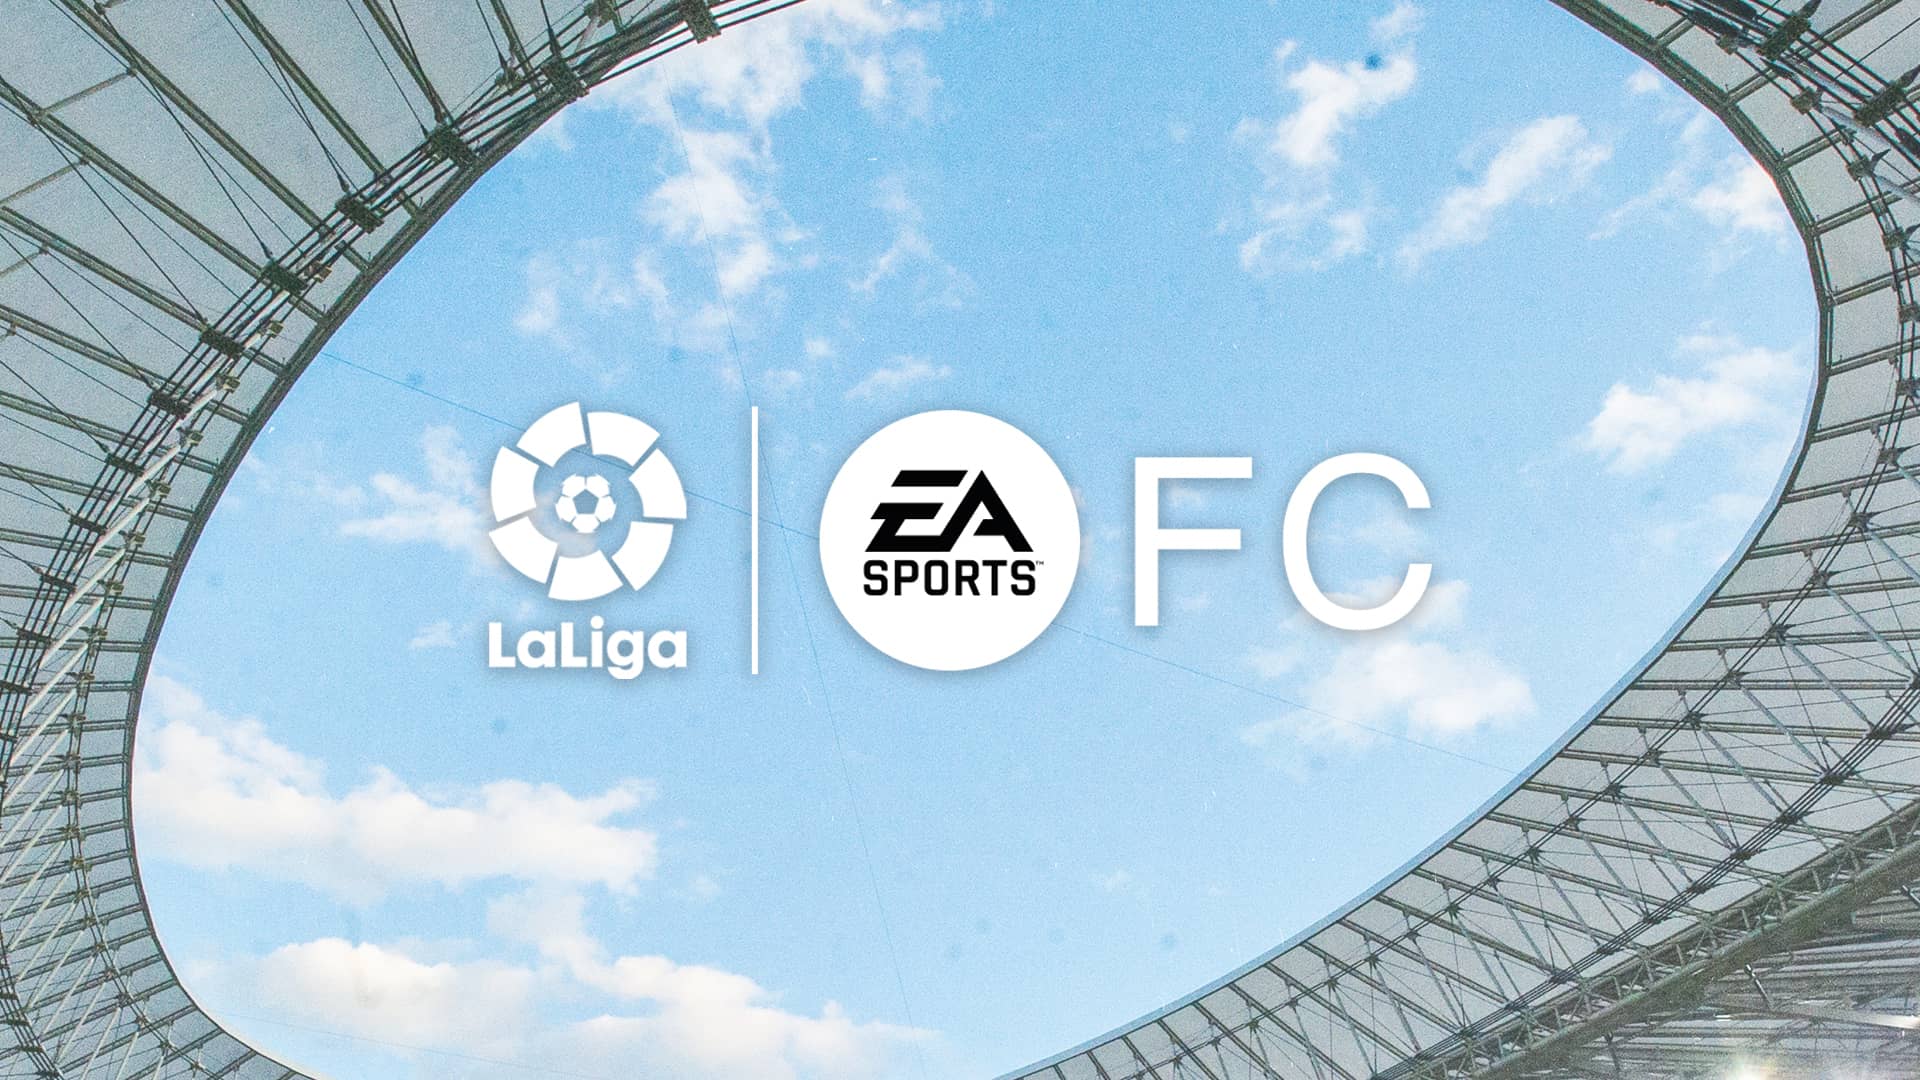 Ea sports and laliga announce expansive new partnership with ea sports fc